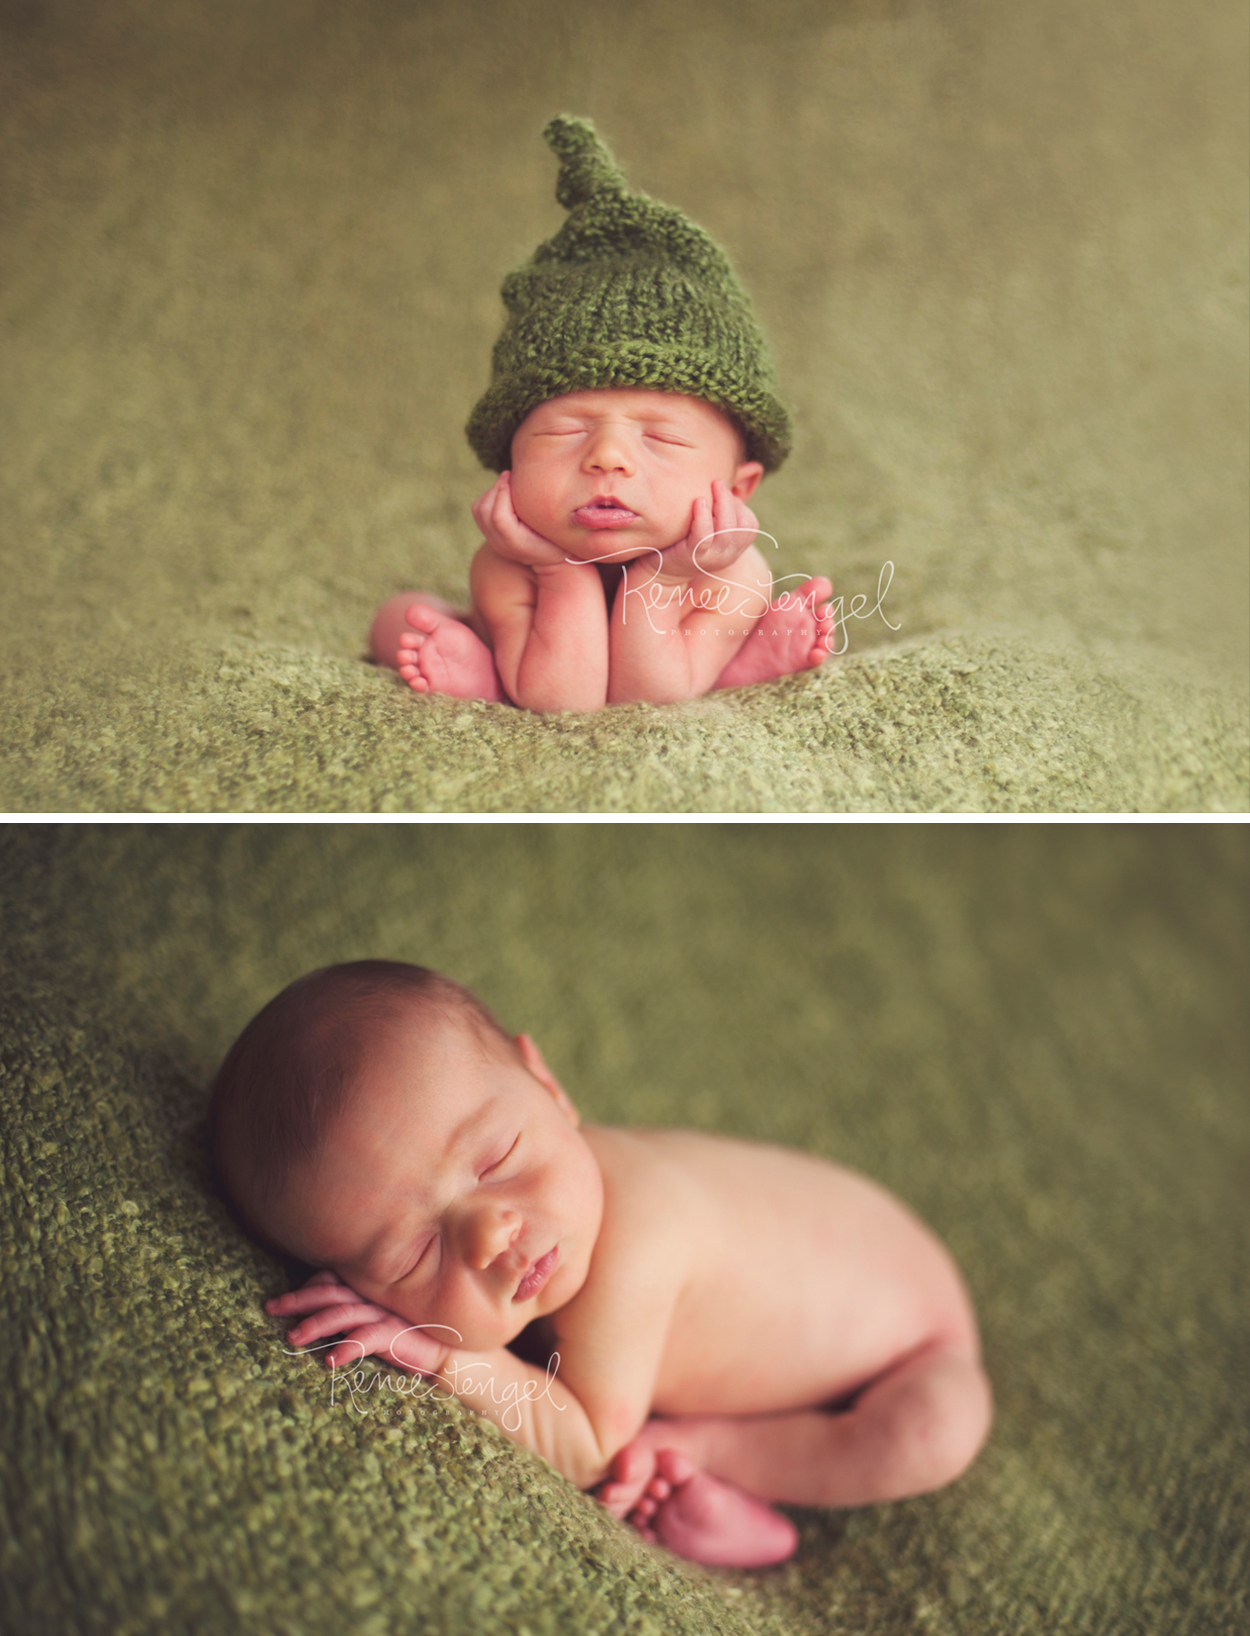 Newborn froggy pose in green knotted hat and newborn taco pose on green blanket